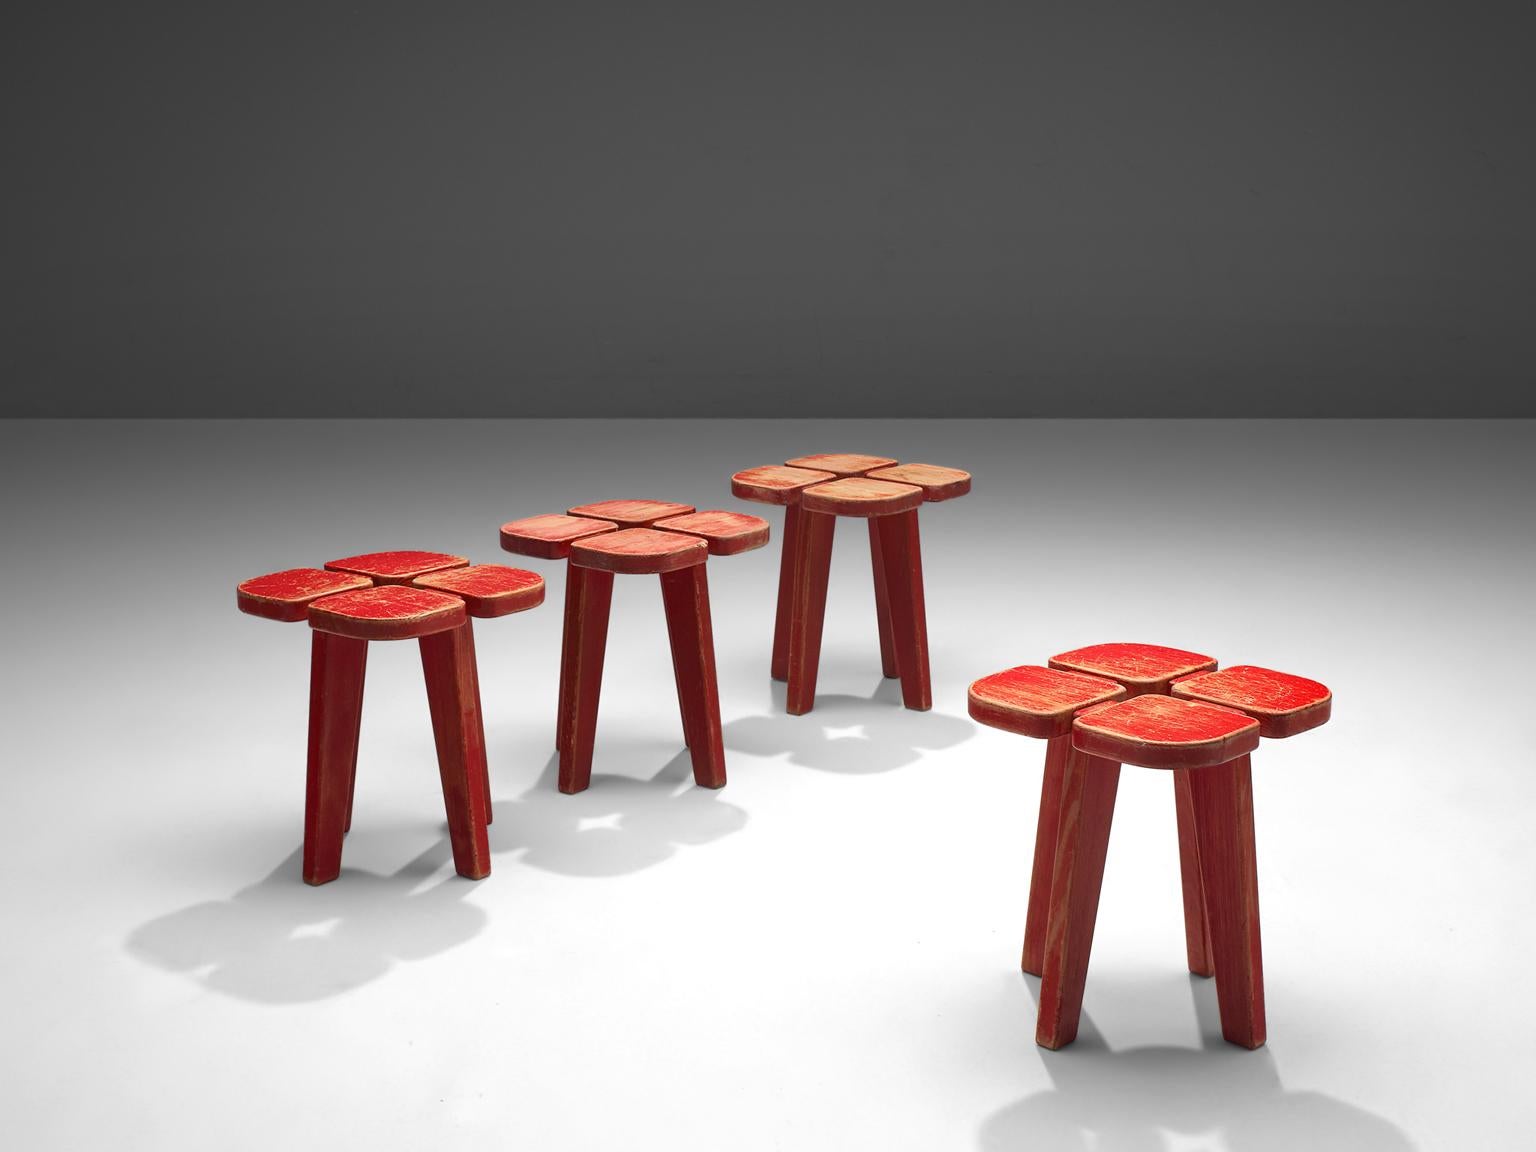 Lisa Johansson-Pape for Stockman Orno, set of 4 red painted 'Apila' barstools, pine, Finland, 1960s. 

Very playful set of 4 stools in red coated pinewood, each with their unique patina. The design is simplistic: A clover top with four sloping legs.